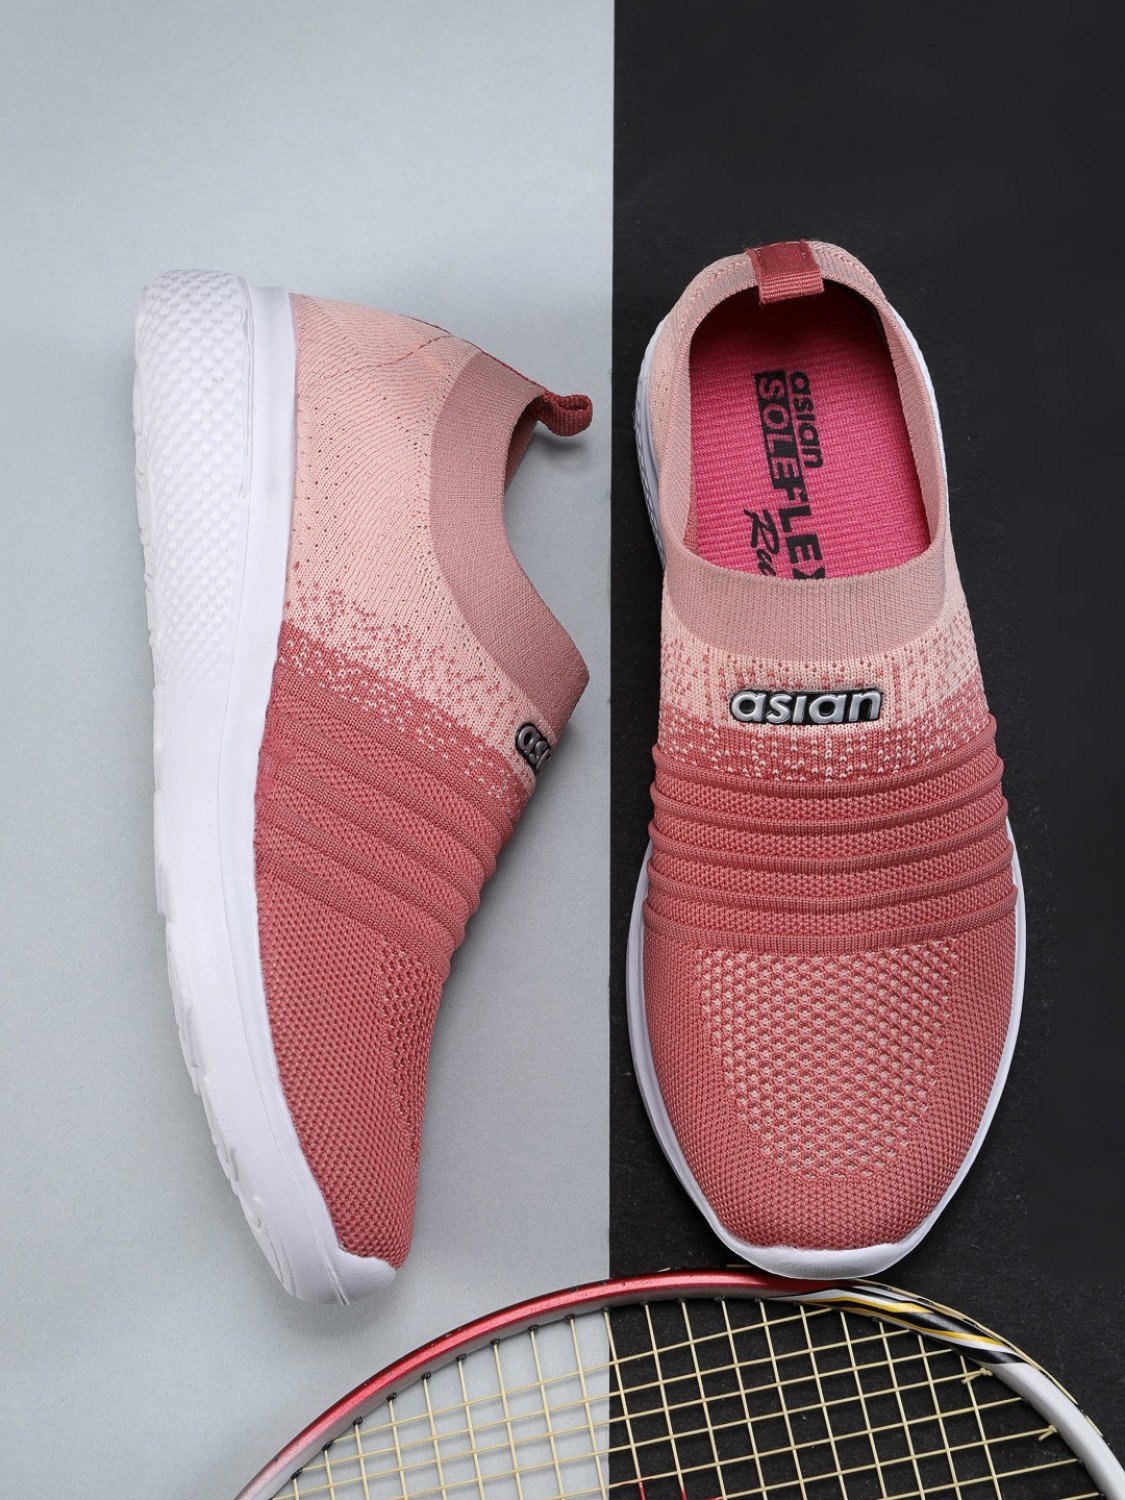 asian Elasto-02 sports shoes for women | Running shoes for girls stylish  latest design new fashion |casual sneakers for ladies | Lace up Lightweight